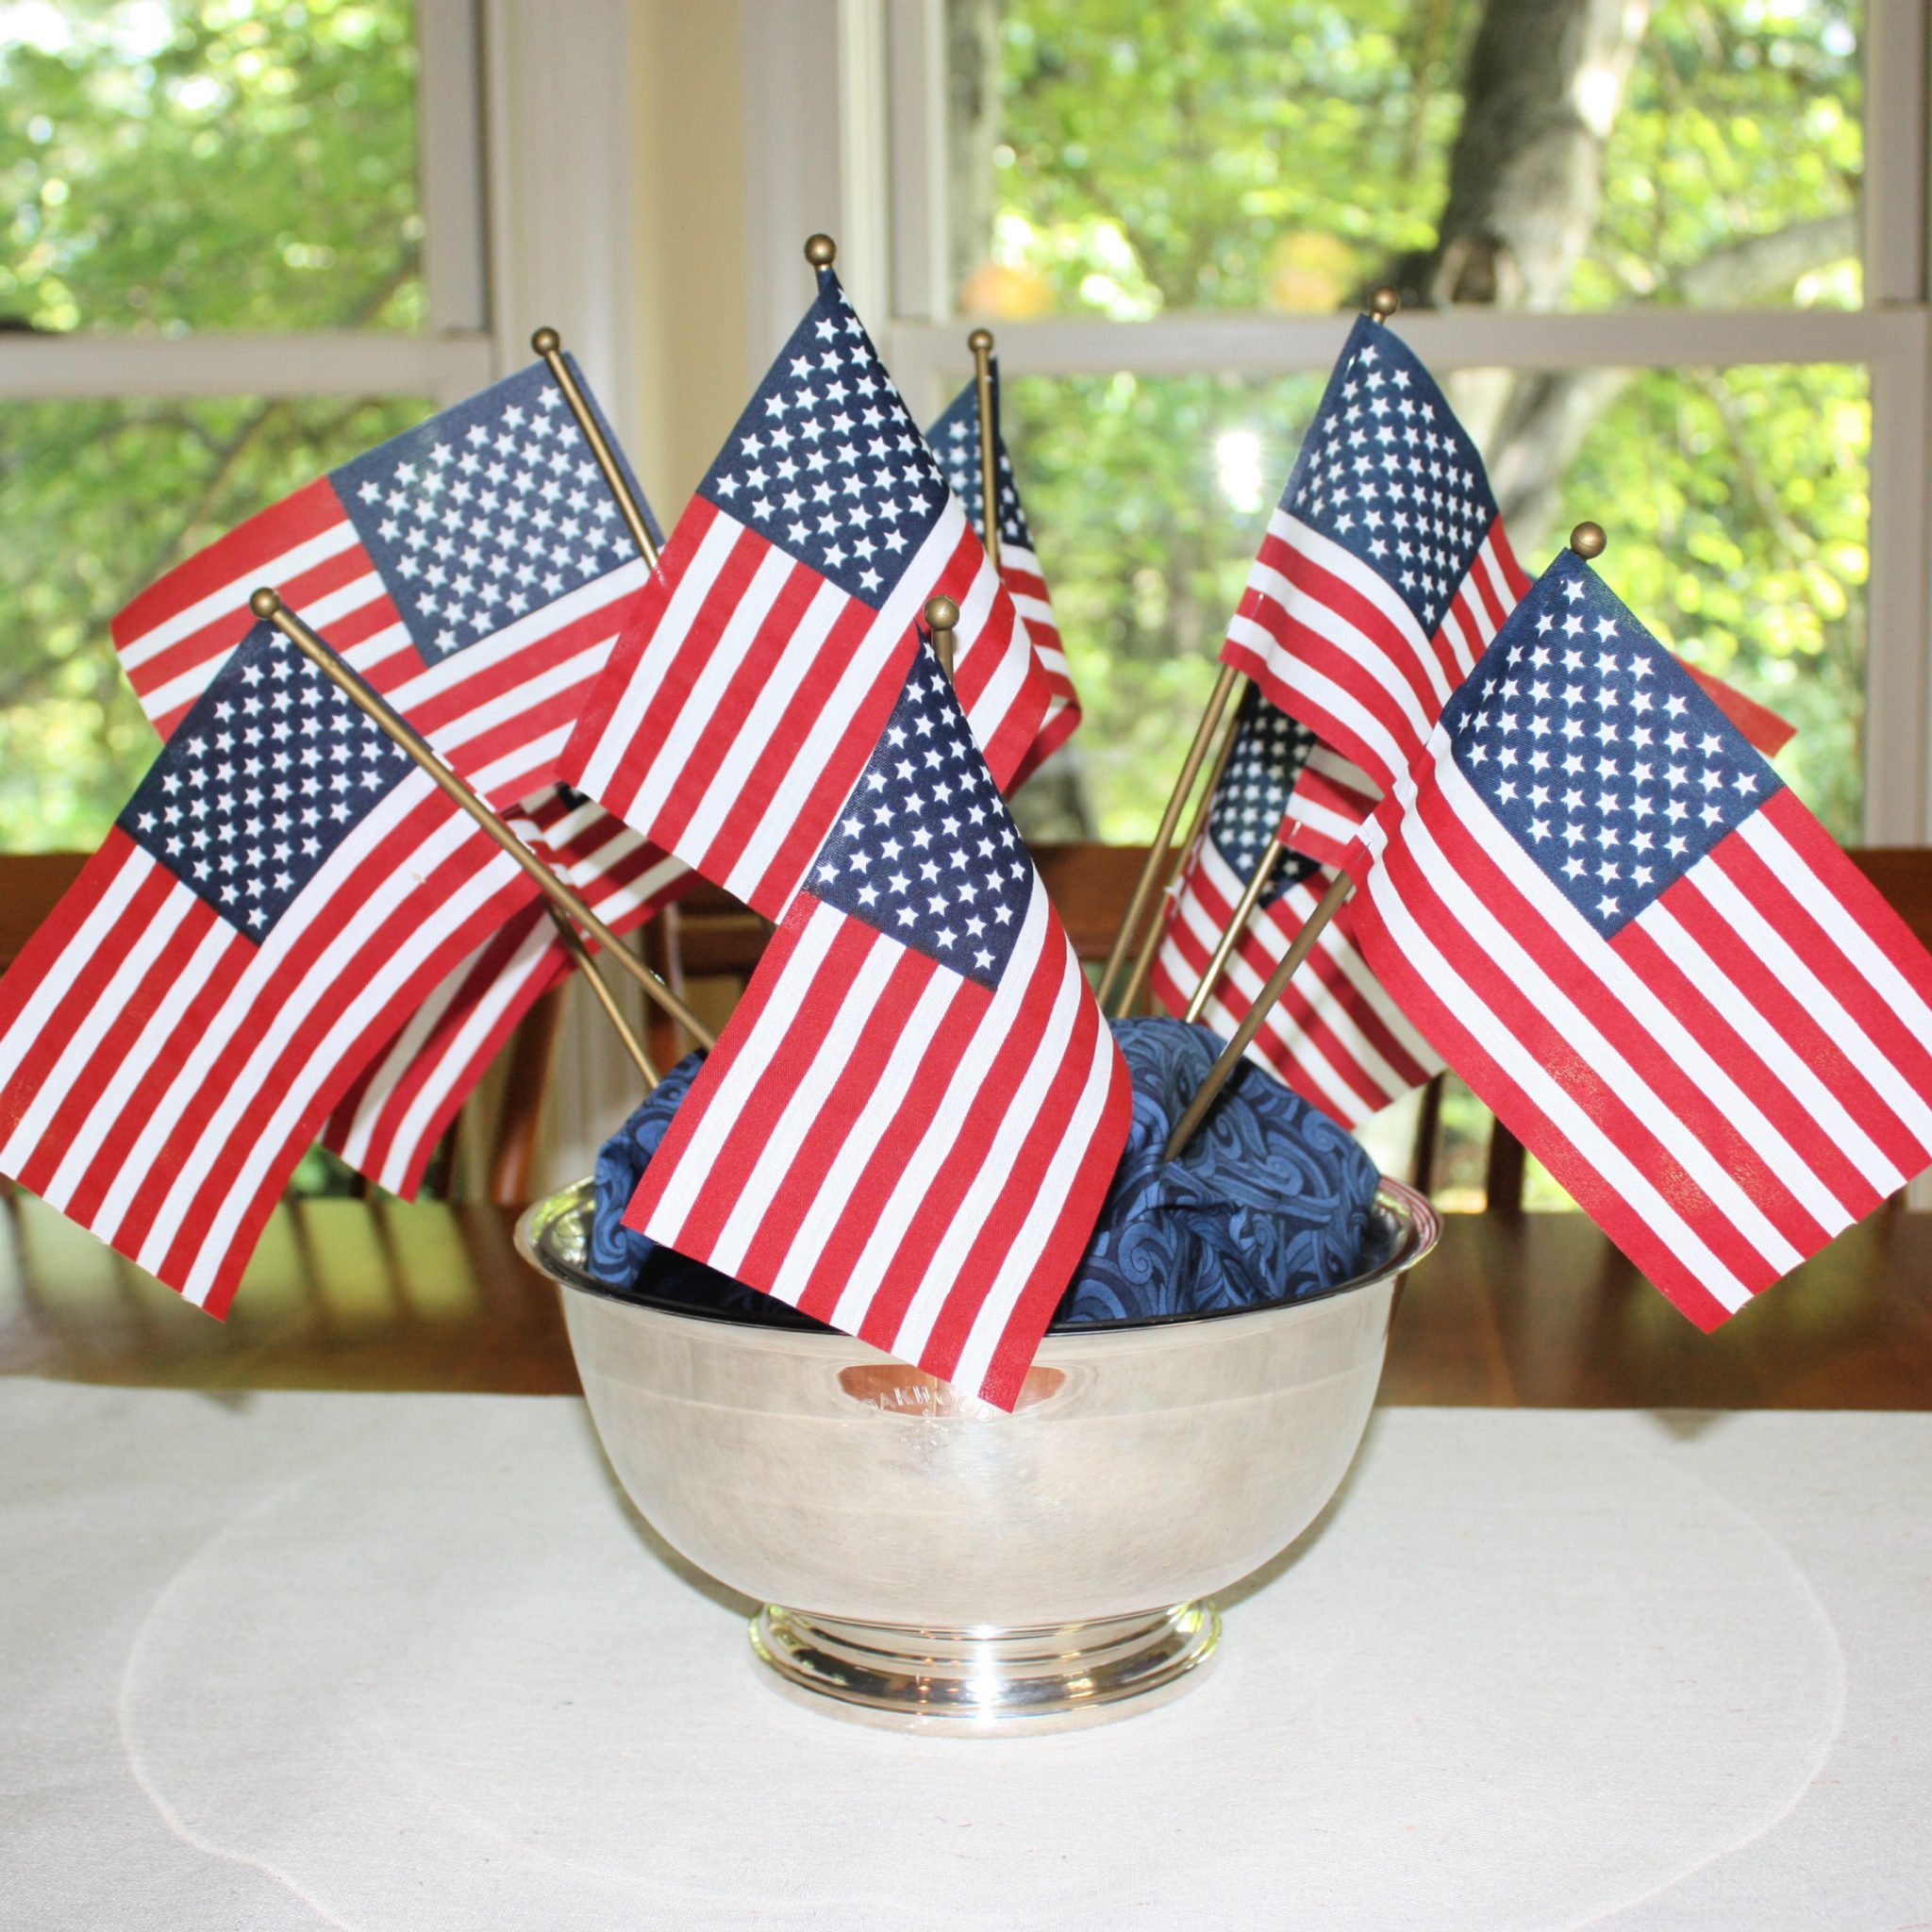 Small American flags displayed in a silver bowl with blue fabric